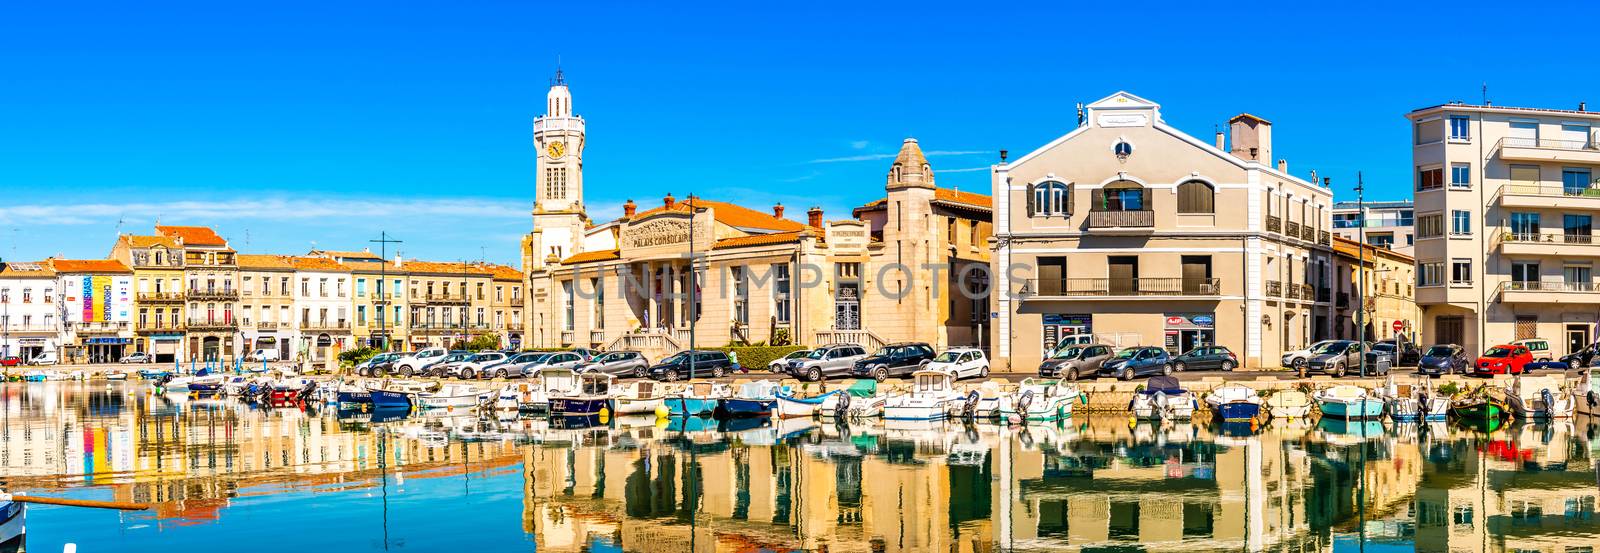 The facades and their reflections, along the Peyrade canal in Sète, in the Herault in Occitanie. by Frederic